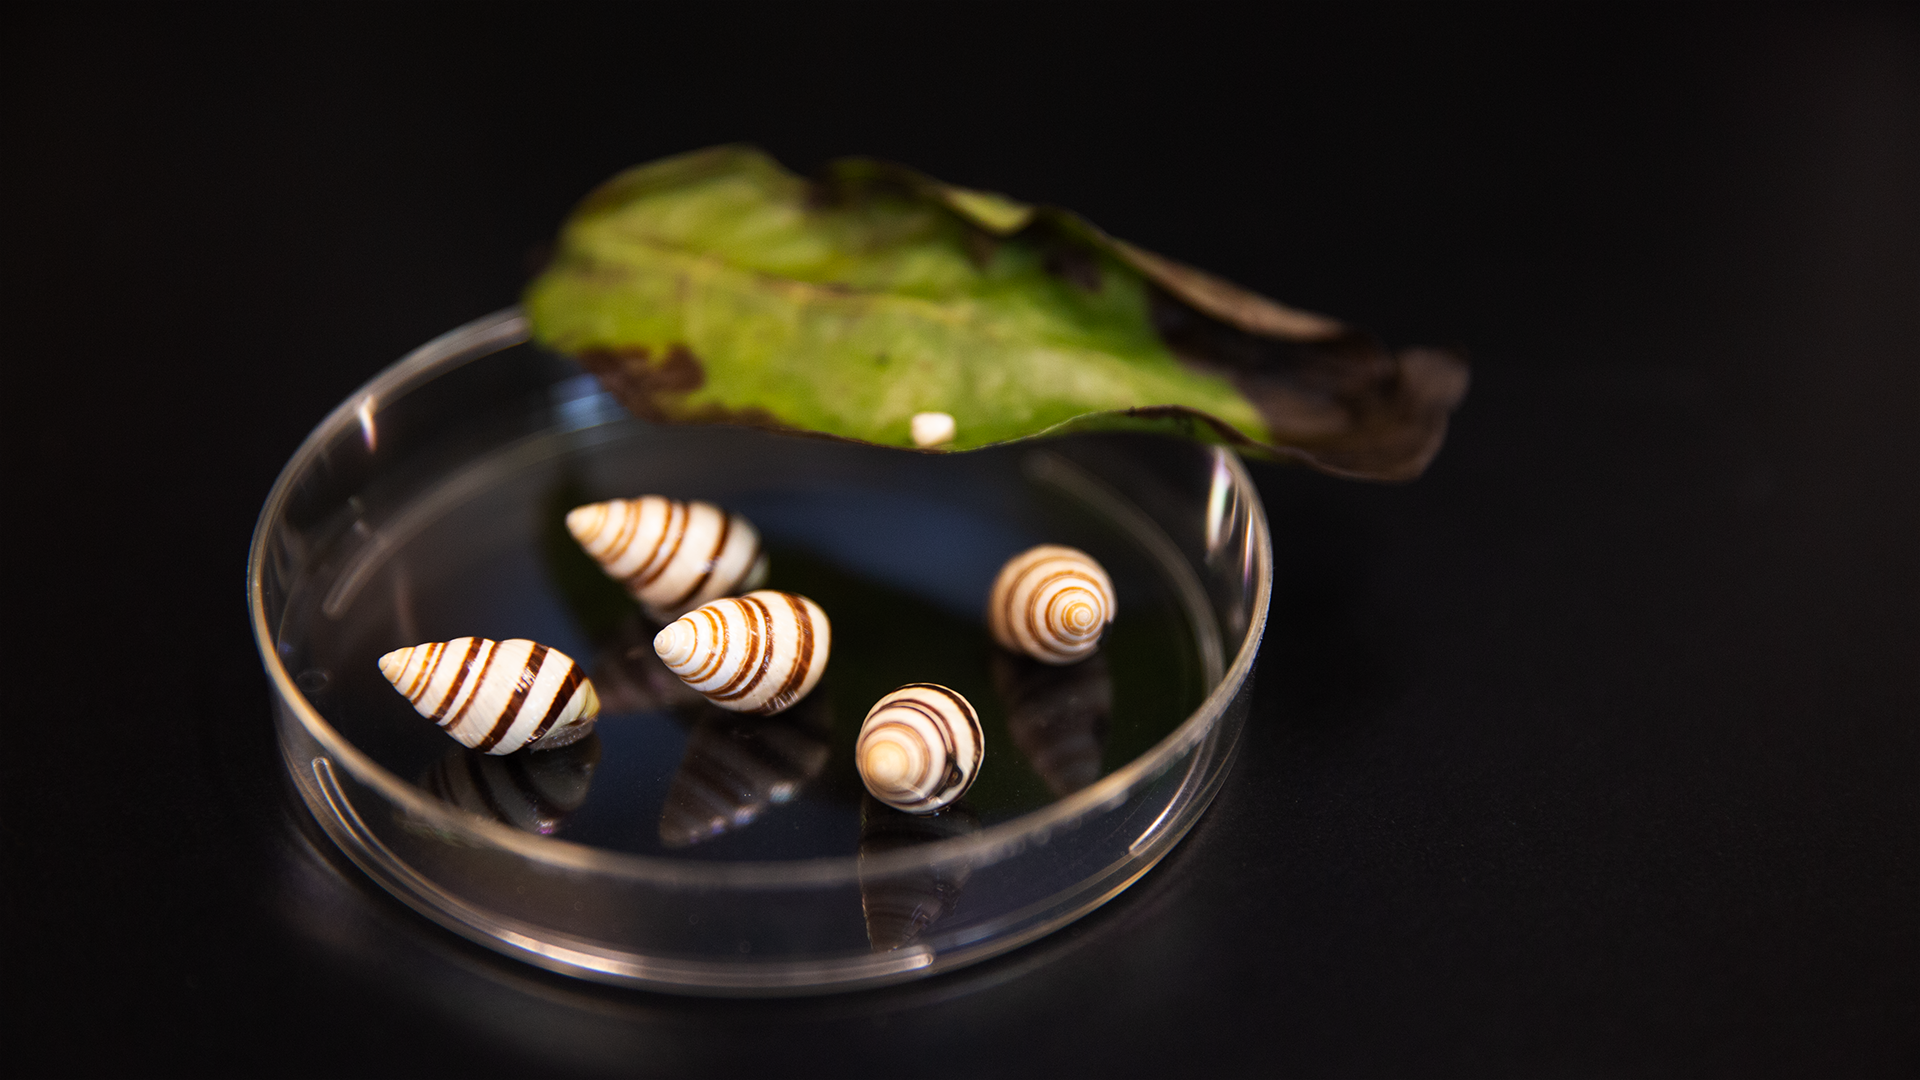 Five small snails with brown and white spiraled shells in a clear petri dish next to a leaf.